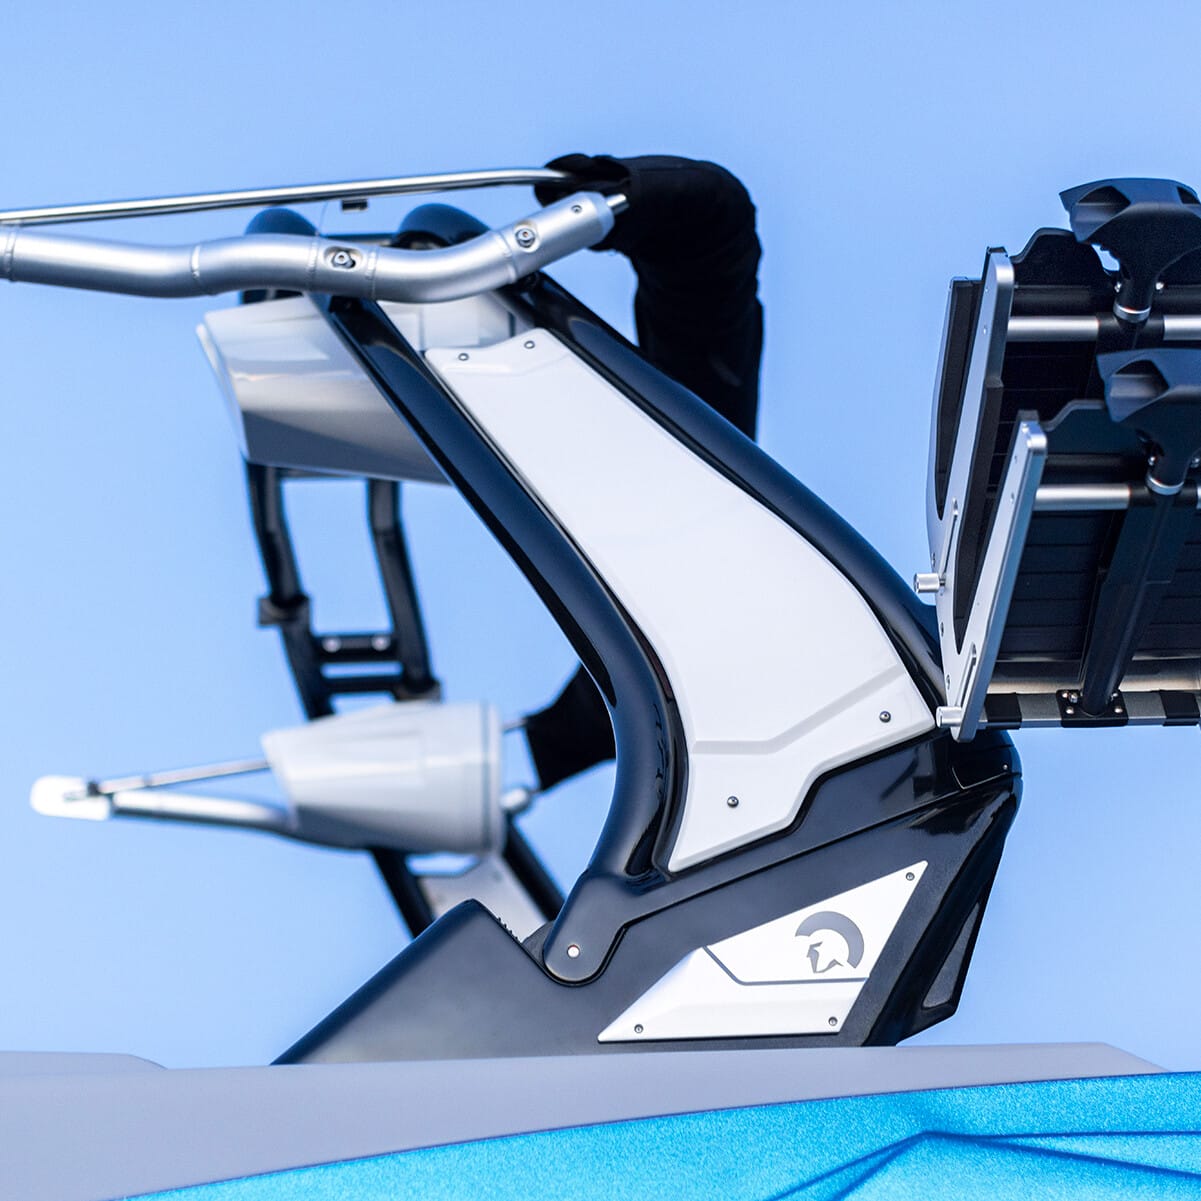 Robotic mechanical arm with a sleek white and black design, positioned against a clear blue background.